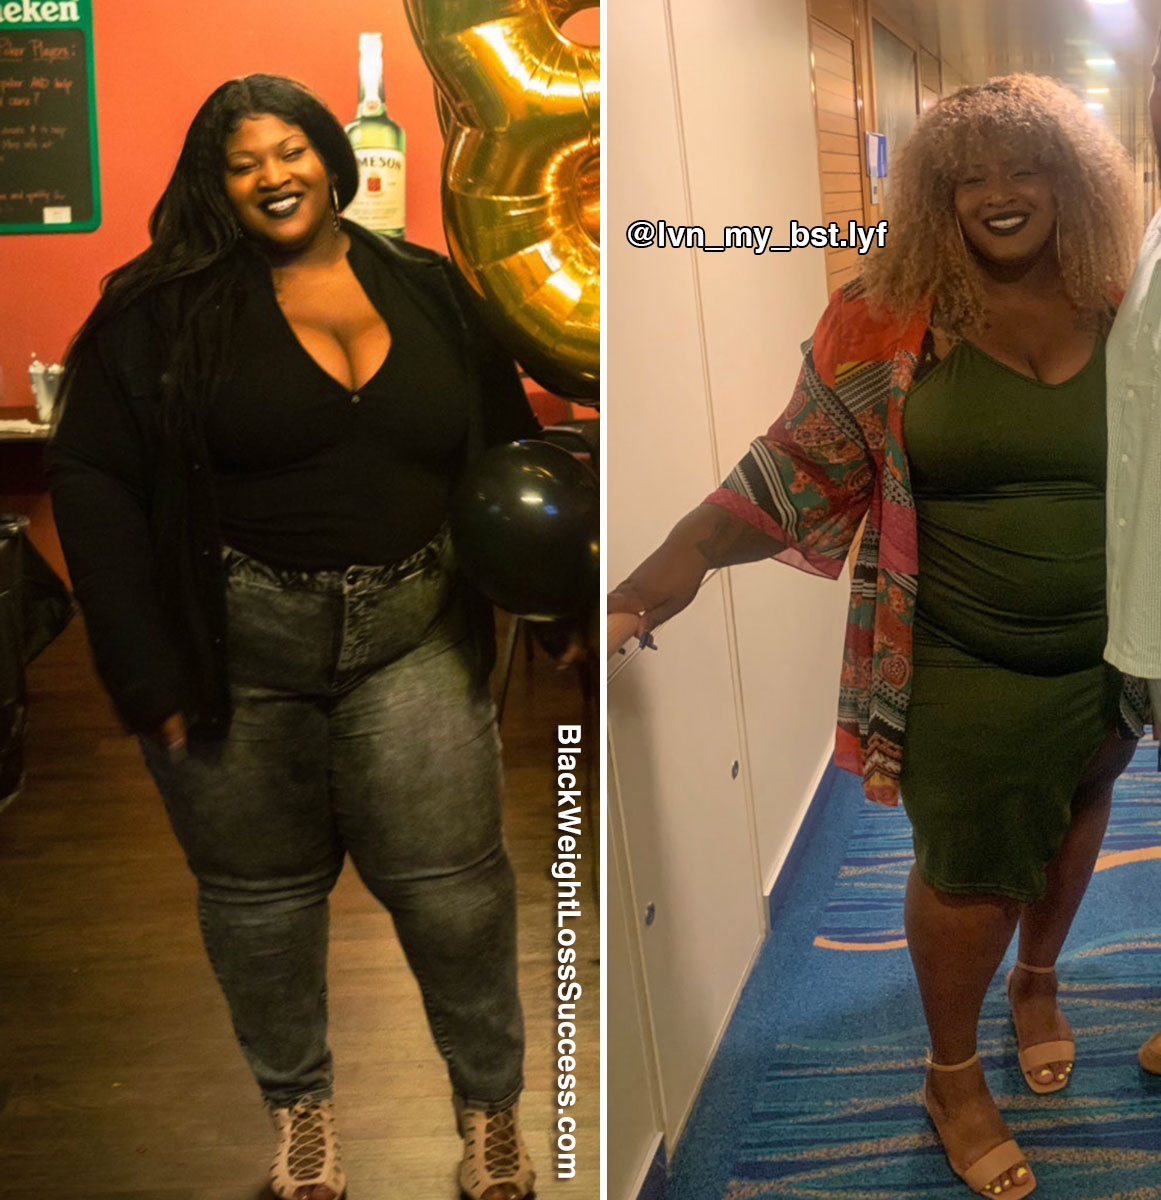 Jeree before and after weight loss